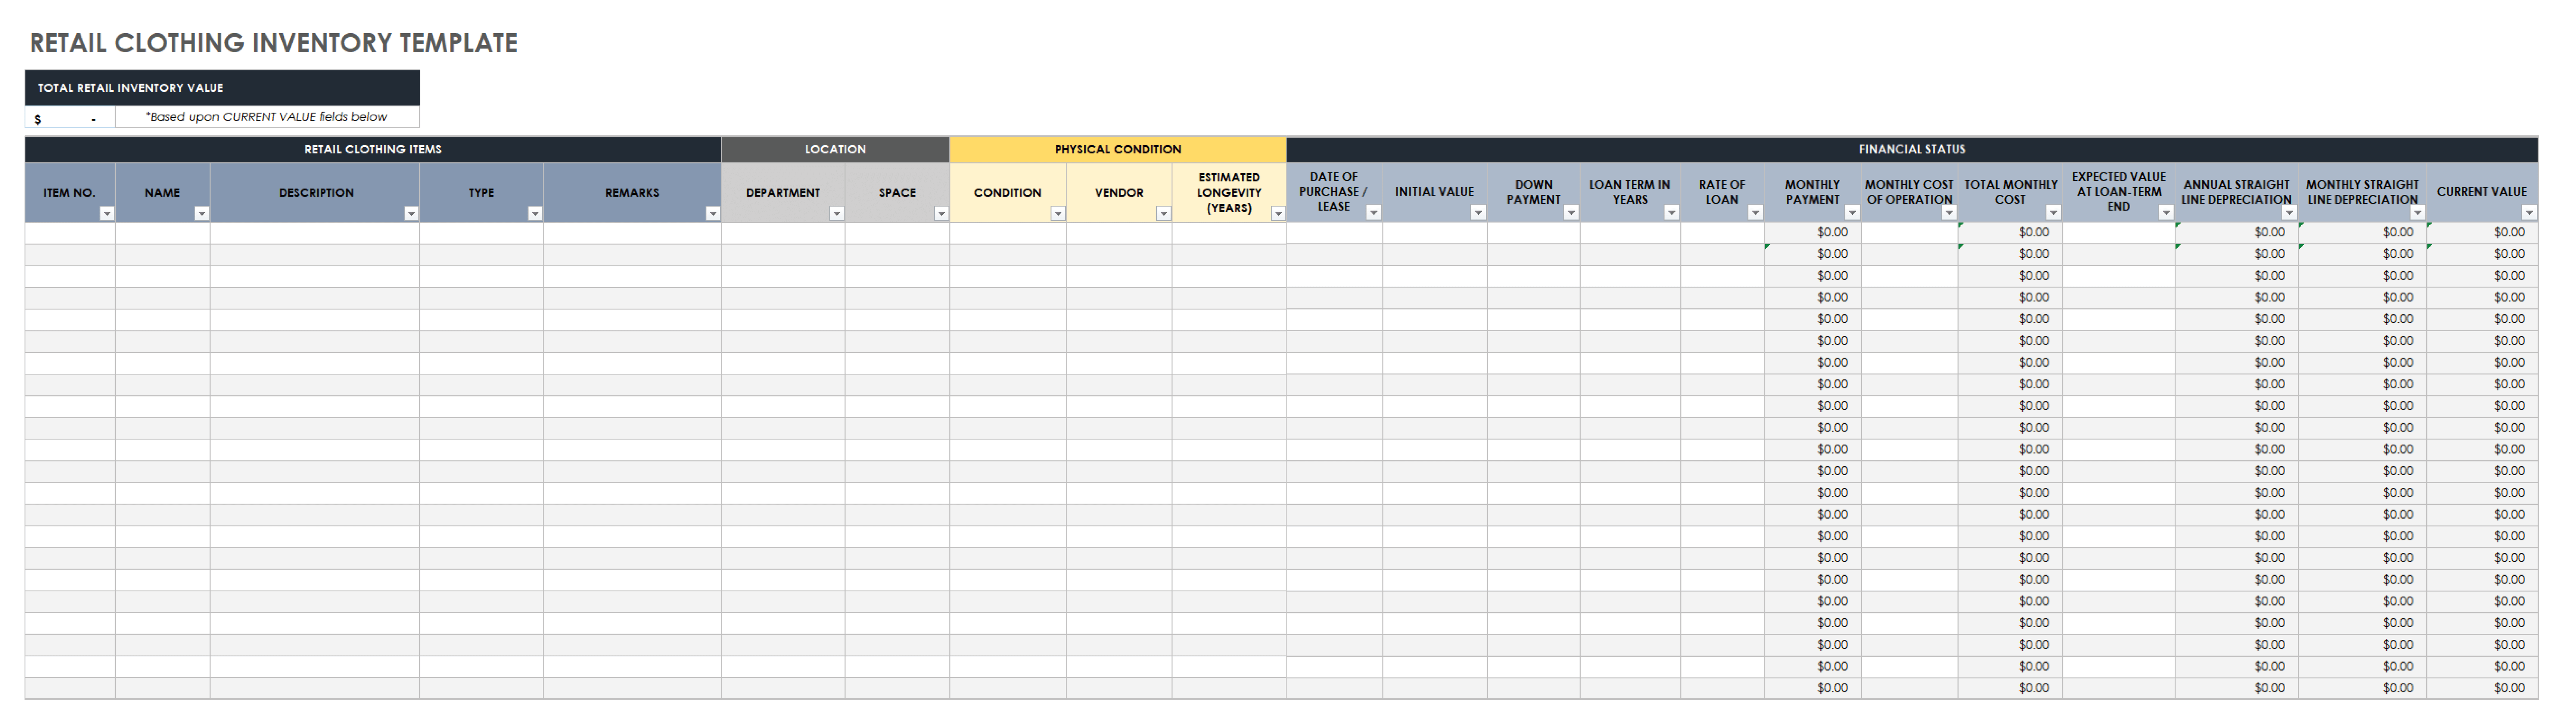 Retail Clothing Inventory Template